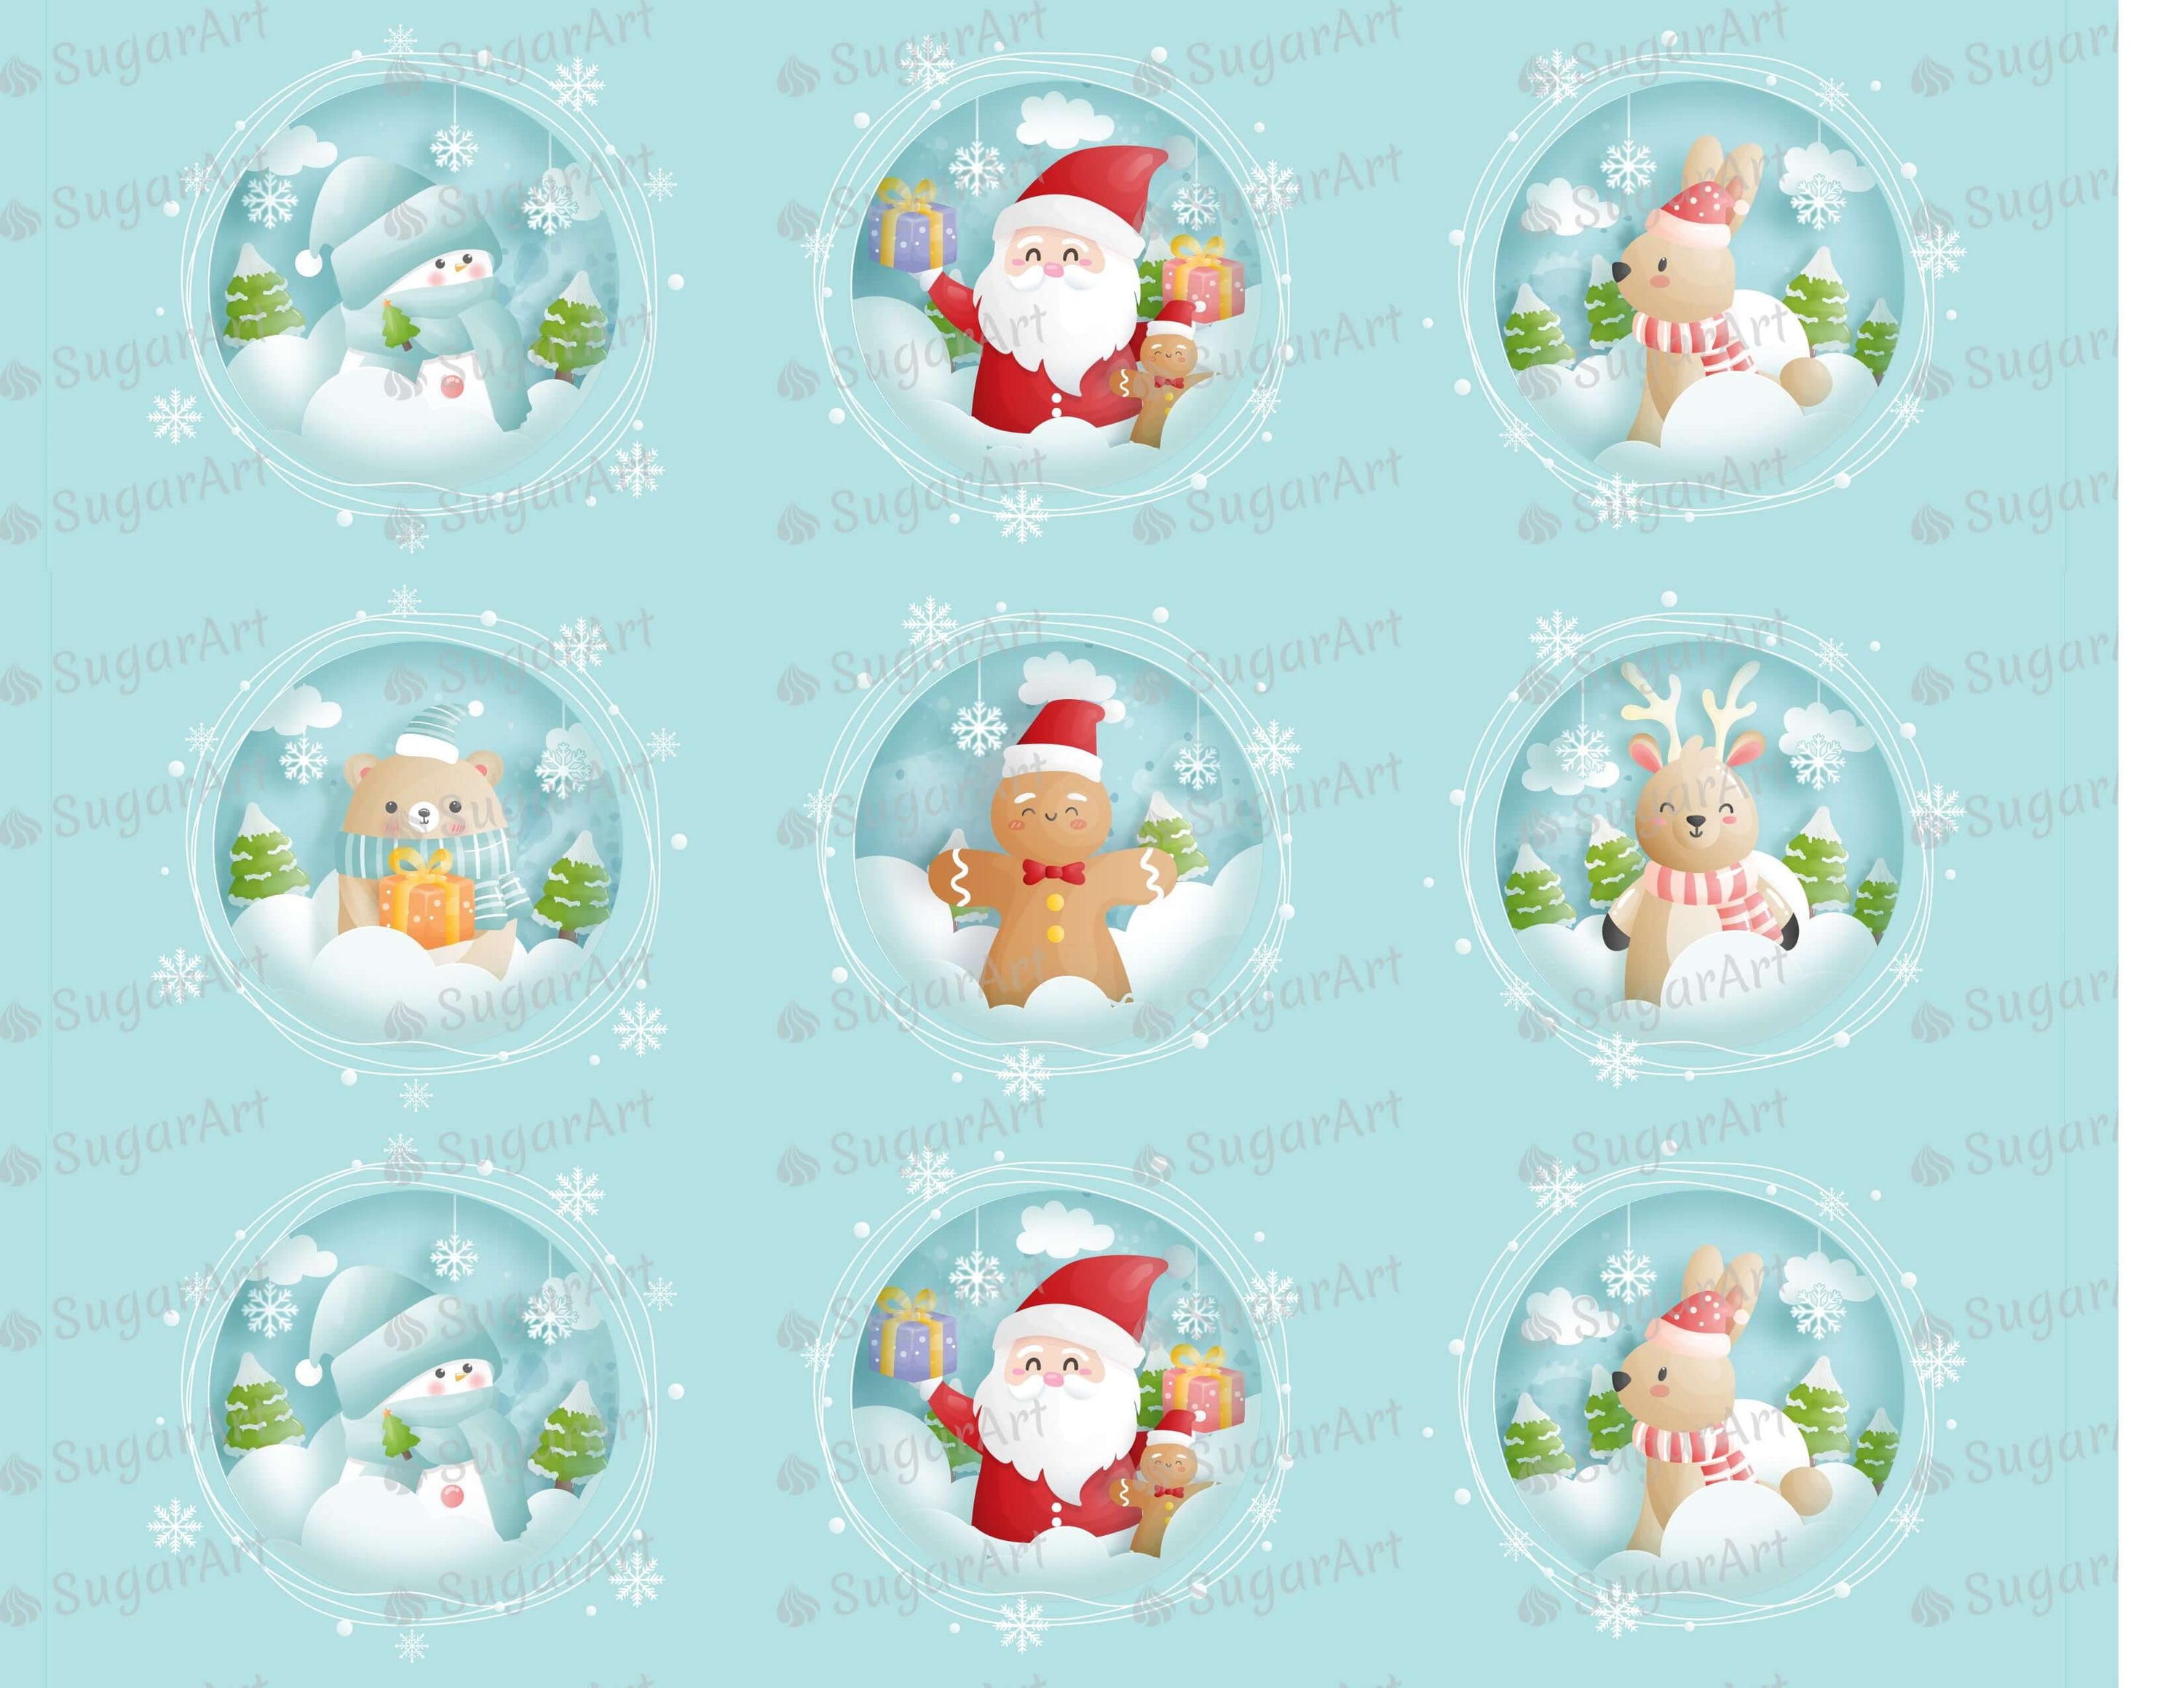 Collection of 12 Winter Round Designs - Icing - ISA162.